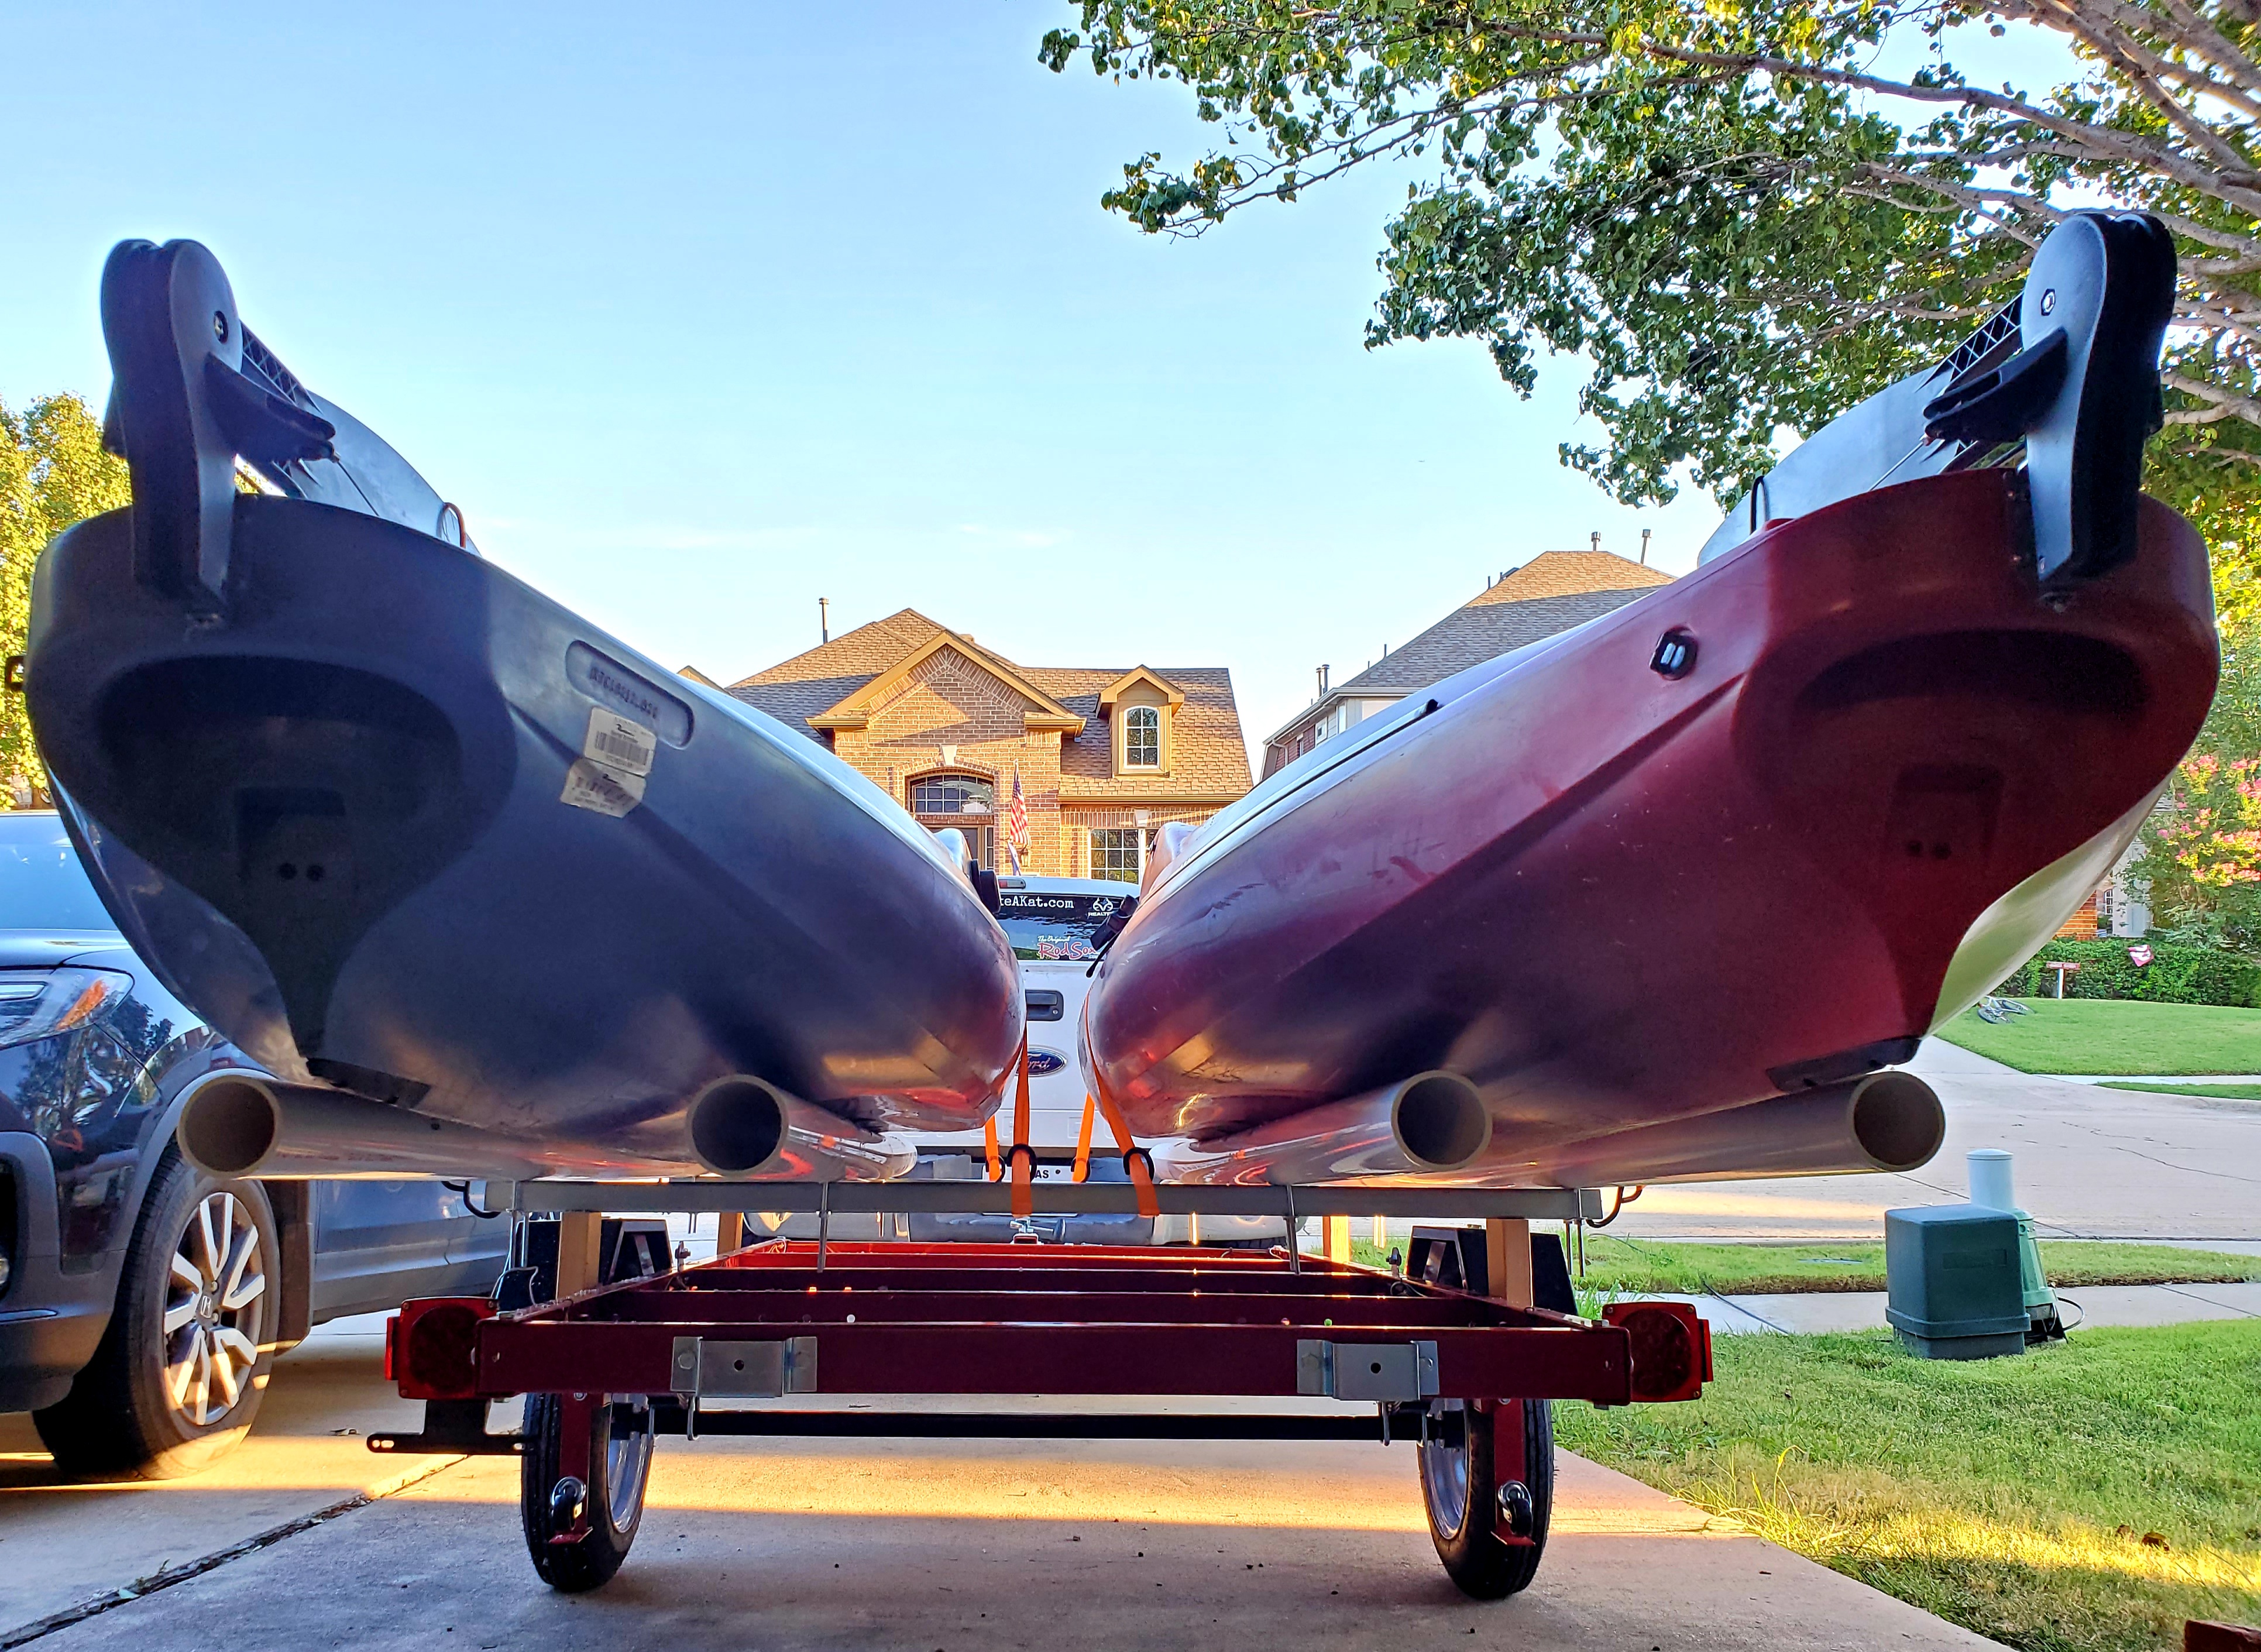 View of the undersides of the Old Town Bigwater PDLs on a kayak trailer